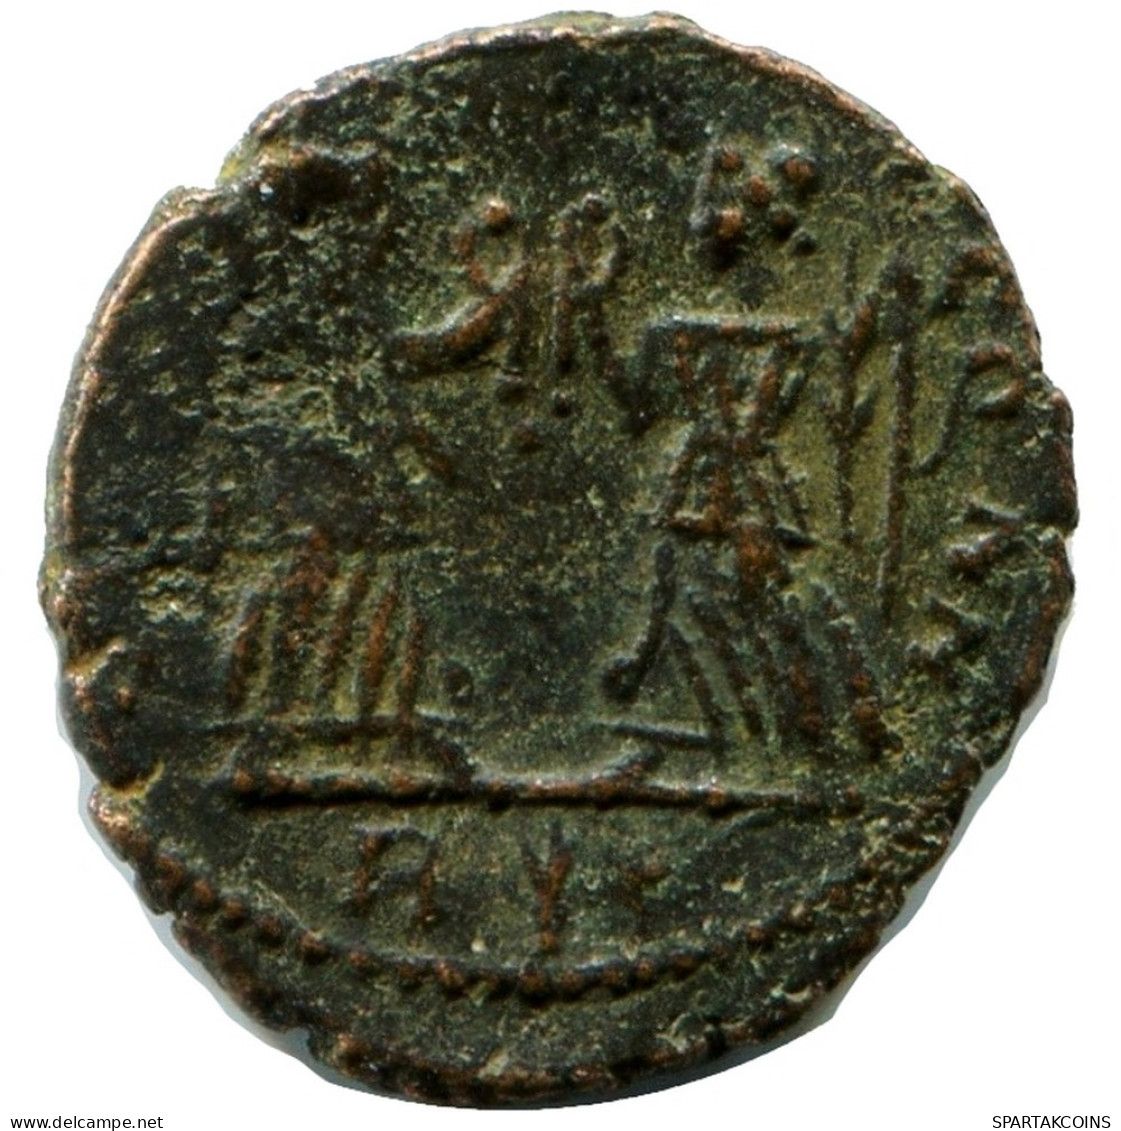 CONSTANS MINTED IN ROME ITALY FOUND IN IHNASYAH HOARD EGYPT #ANC11540.14.D.A - El Imperio Christiano (307 / 363)